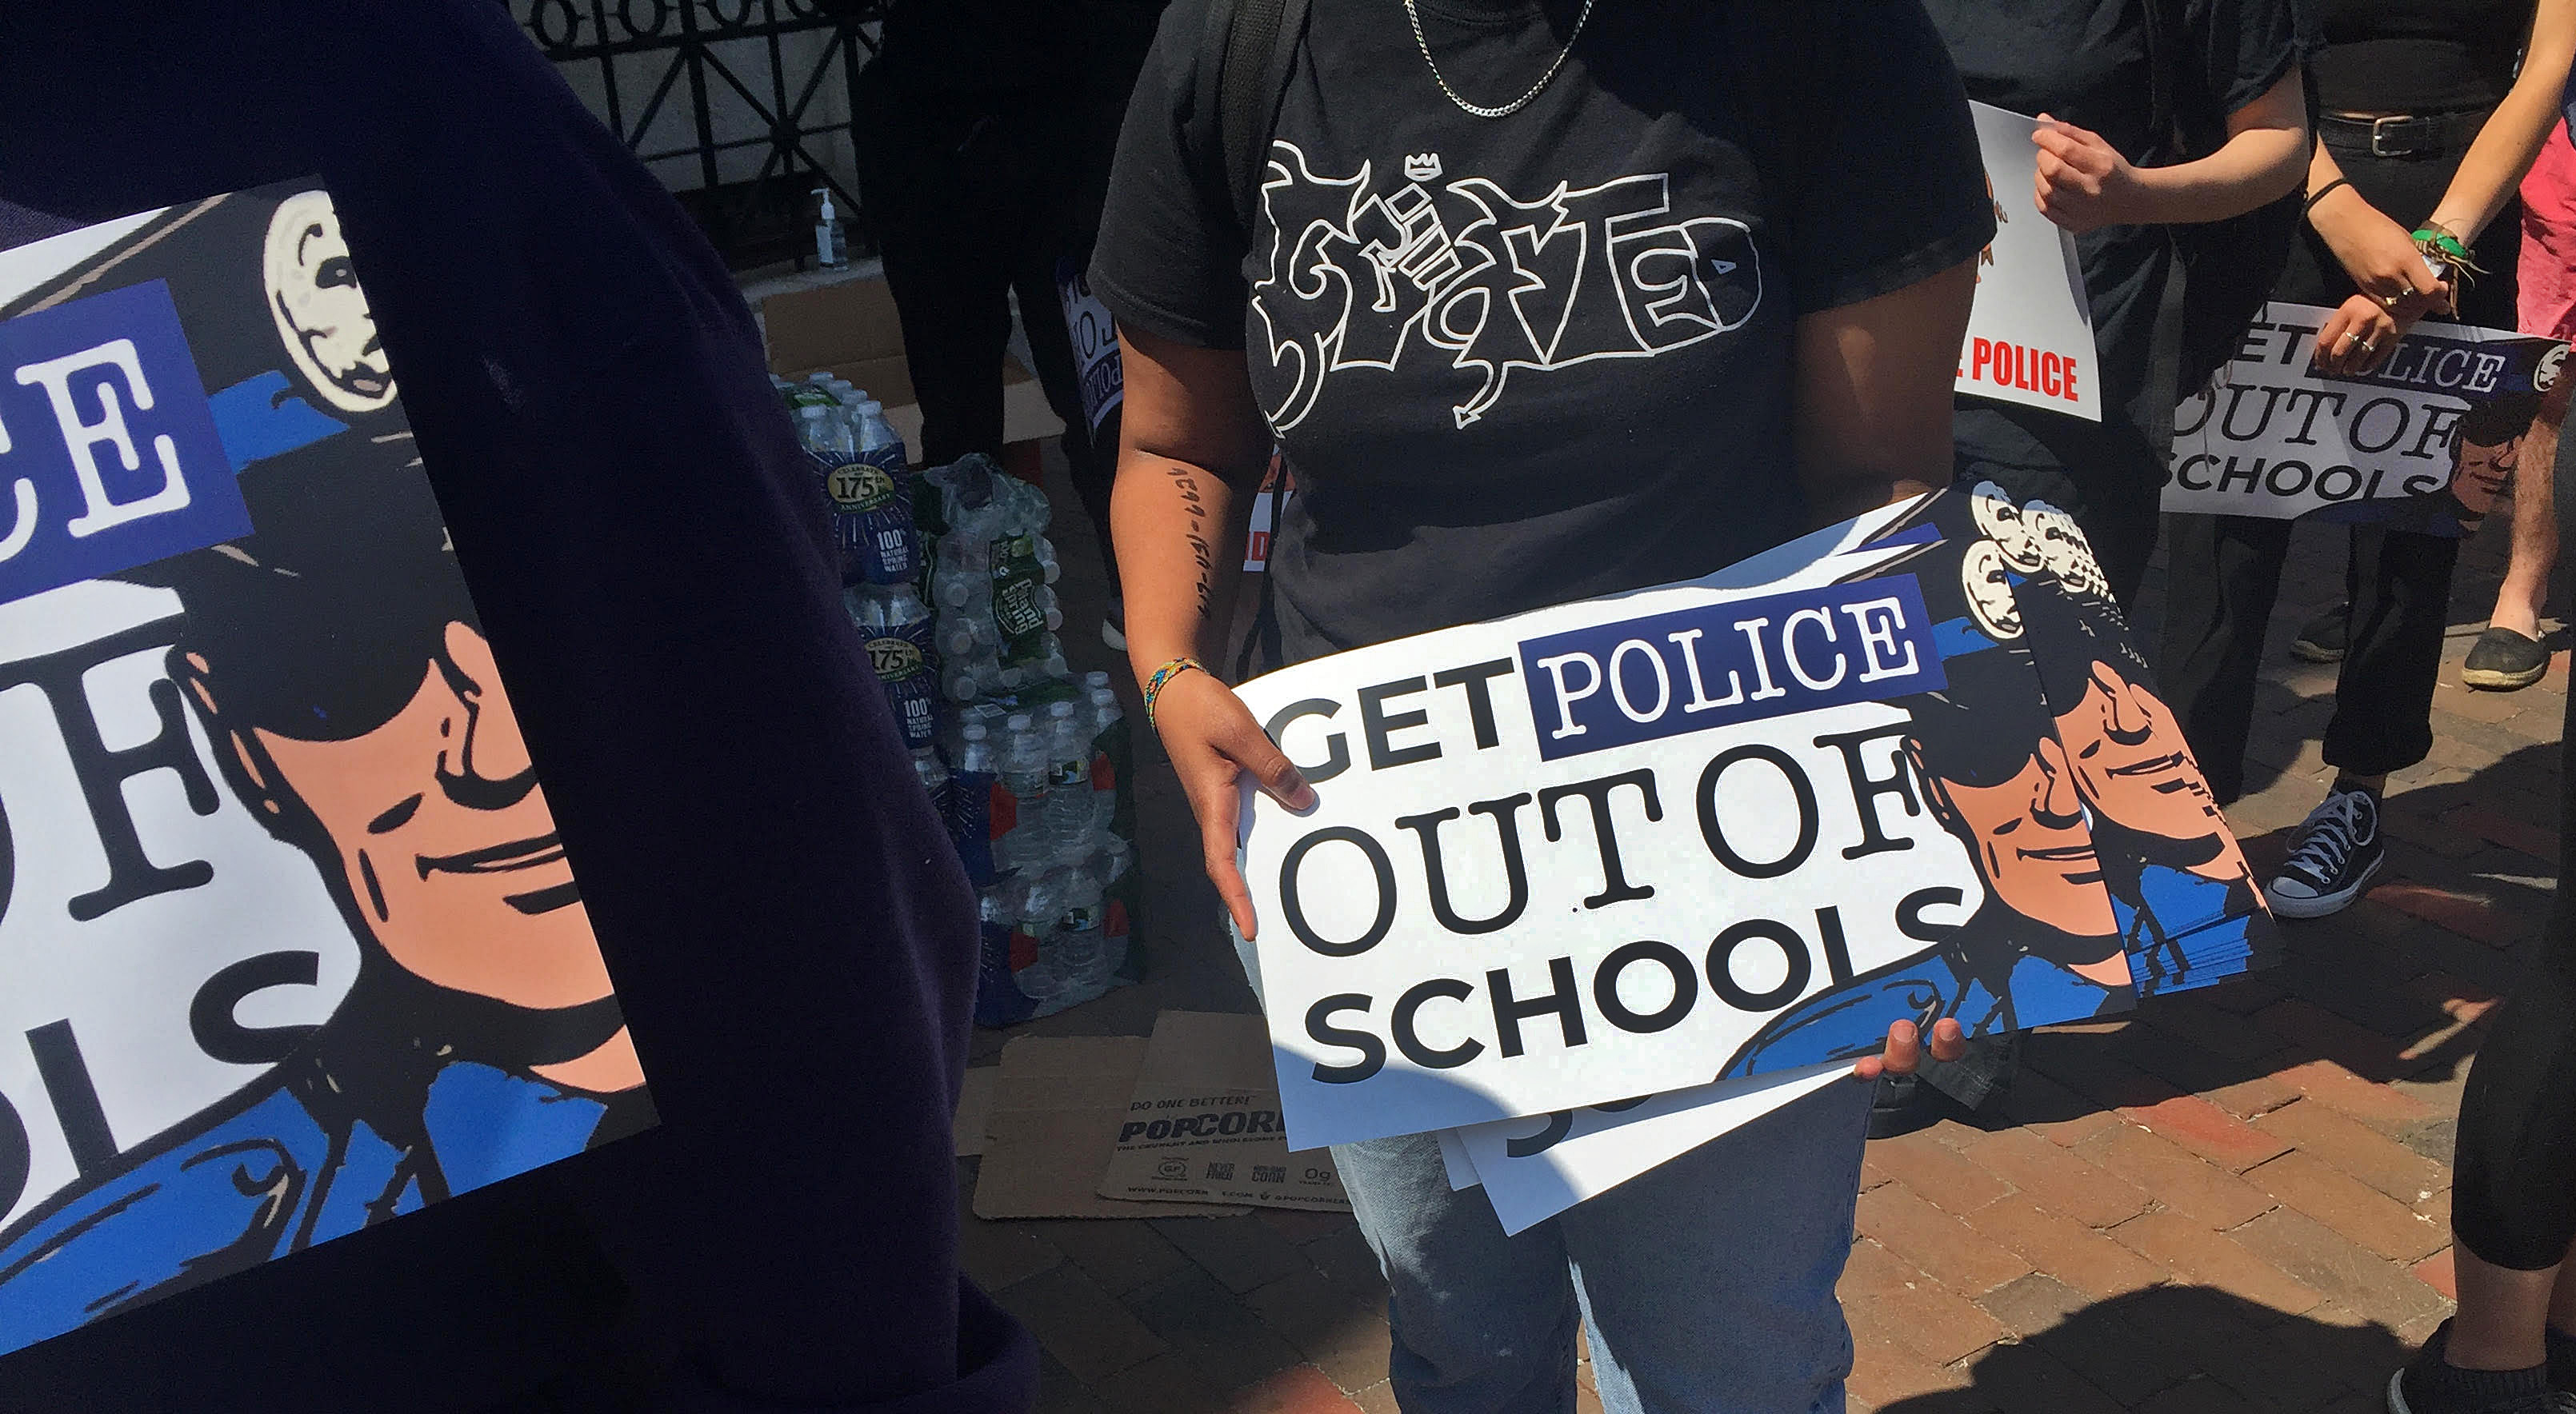 An activist hands out posters calling for the removal of police officers from schools during&nbsp;a youth protest in Boston on June 10.&nbsp;